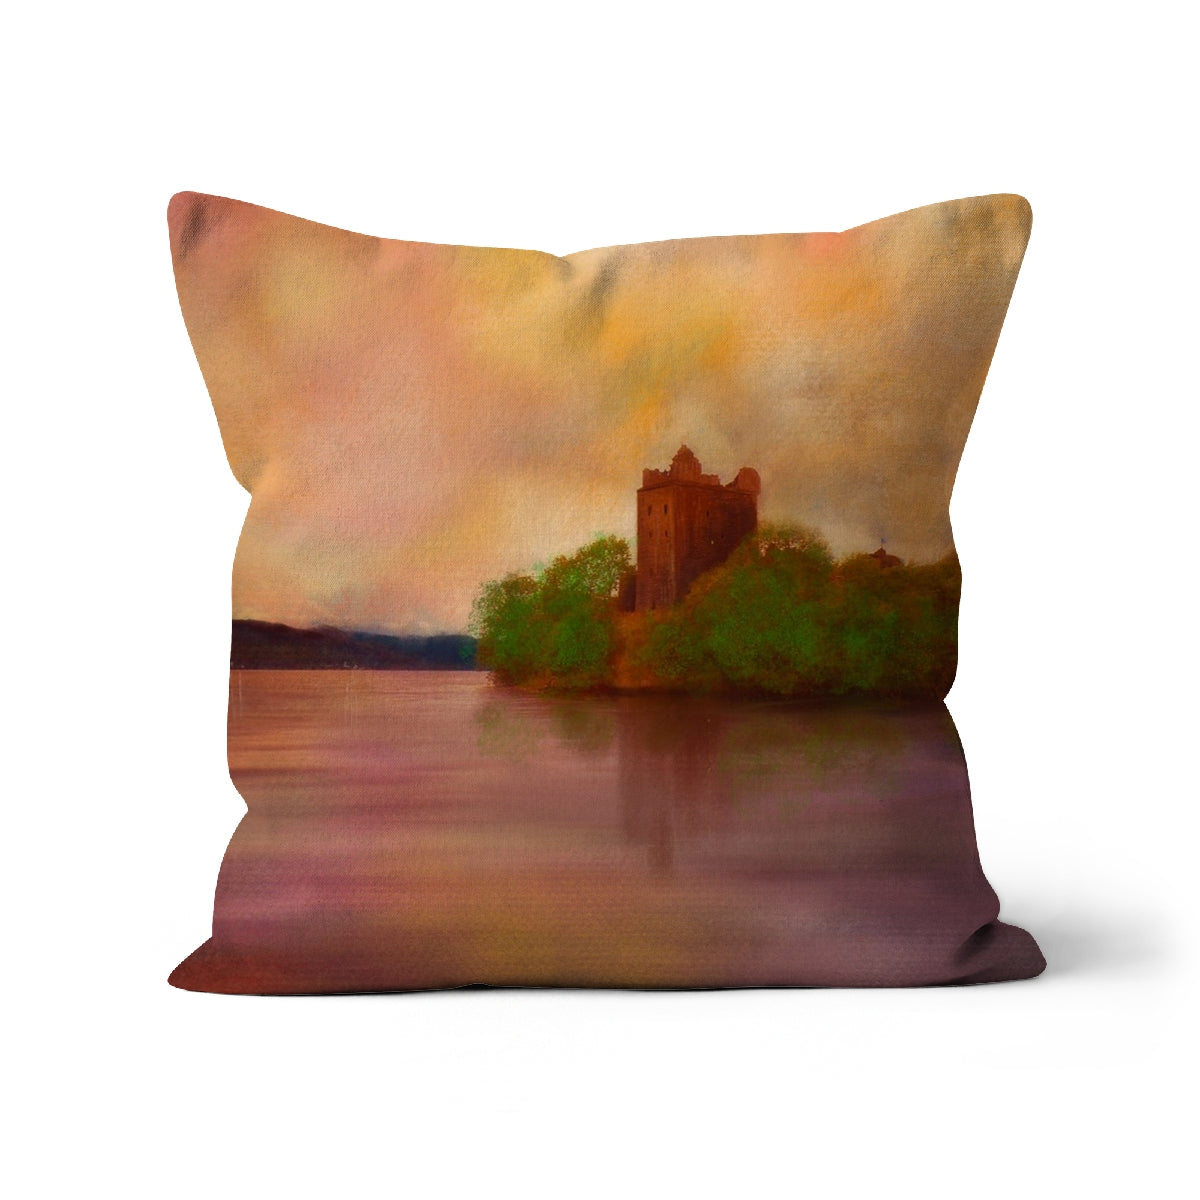 Urquhart Castle Art Gifts Cushion-Cushions-Historic & Iconic Scotland Art Gallery-Linen-18"x18"-Paintings, Prints, Homeware, Art Gifts From Scotland By Scottish Artist Kevin Hunter